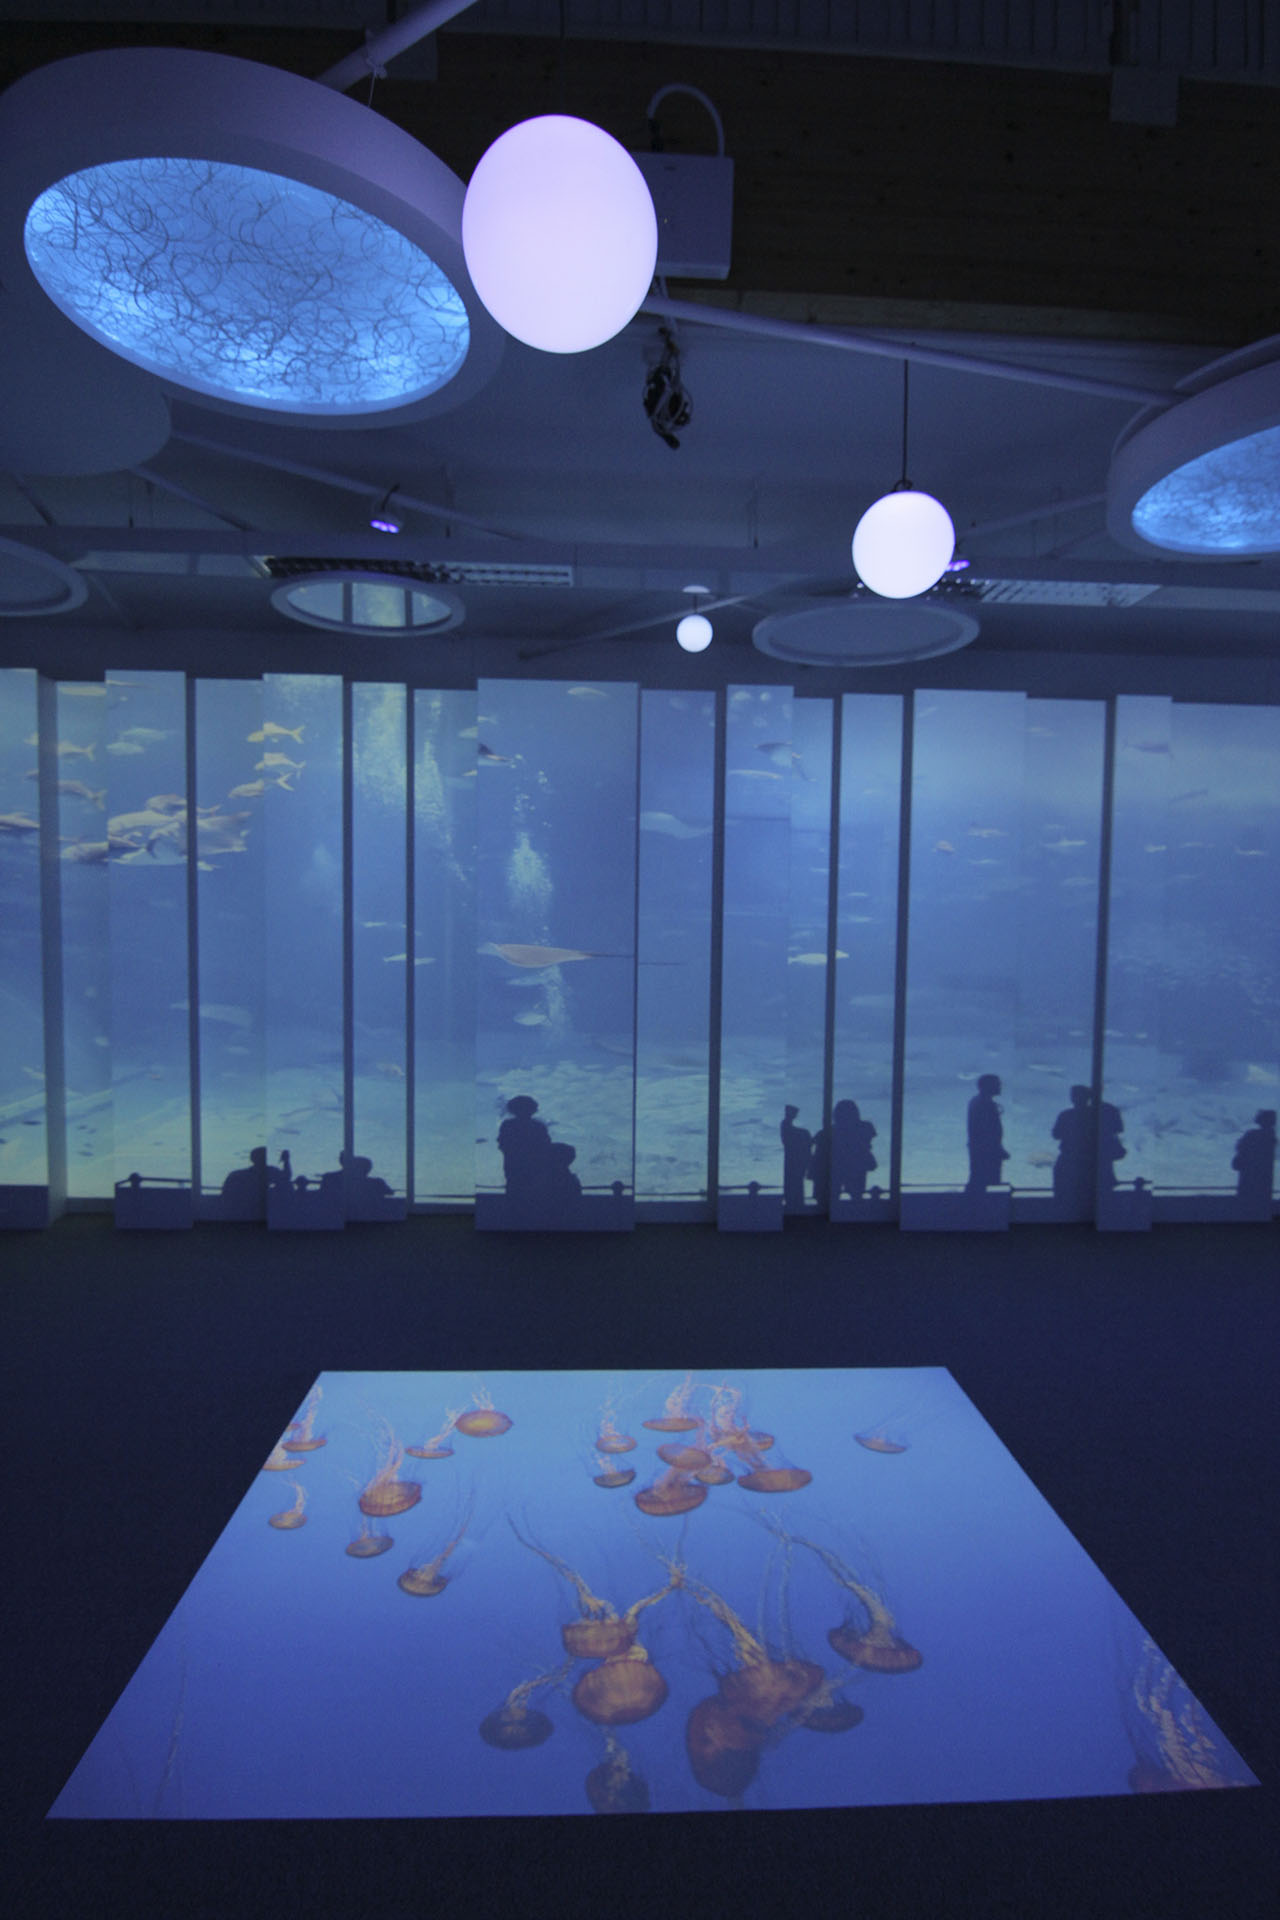 Interactive Floor in Educational Immersive Space installed by 4D Creative Ltd - http://www.4dcreative.co.uk